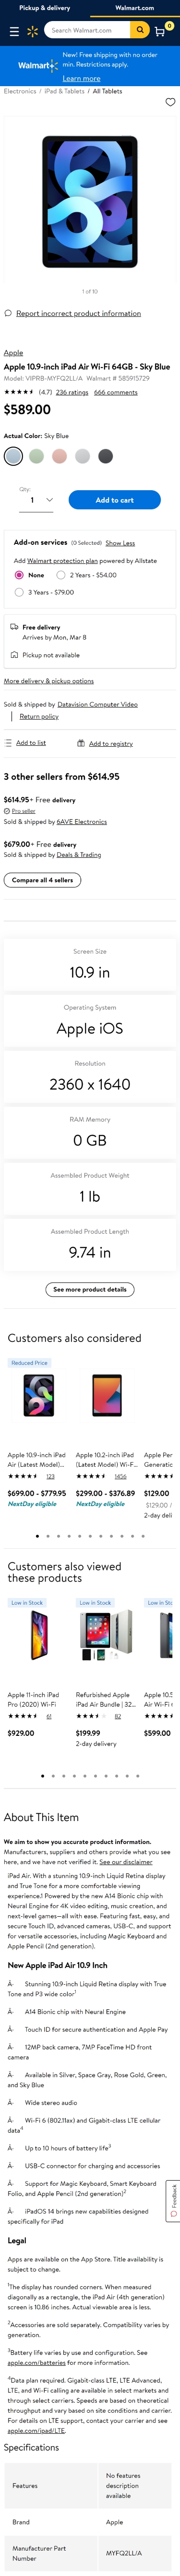 walmart product page mobile